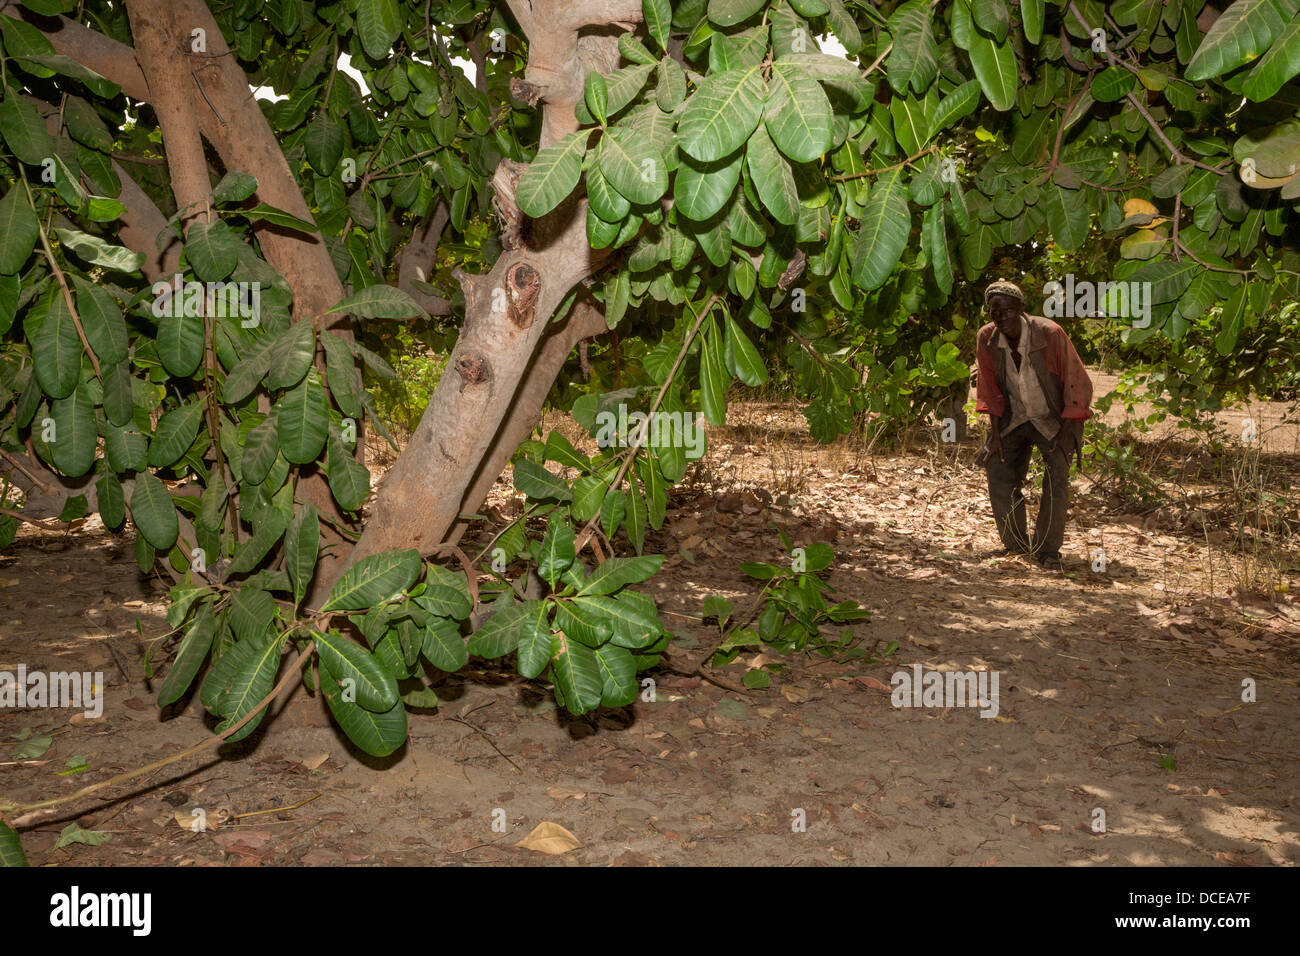 Example of a Less Well-tended Cashew Tree Farm, with less pruning of lower limbs, less clearing of underbrush. Stock Photo